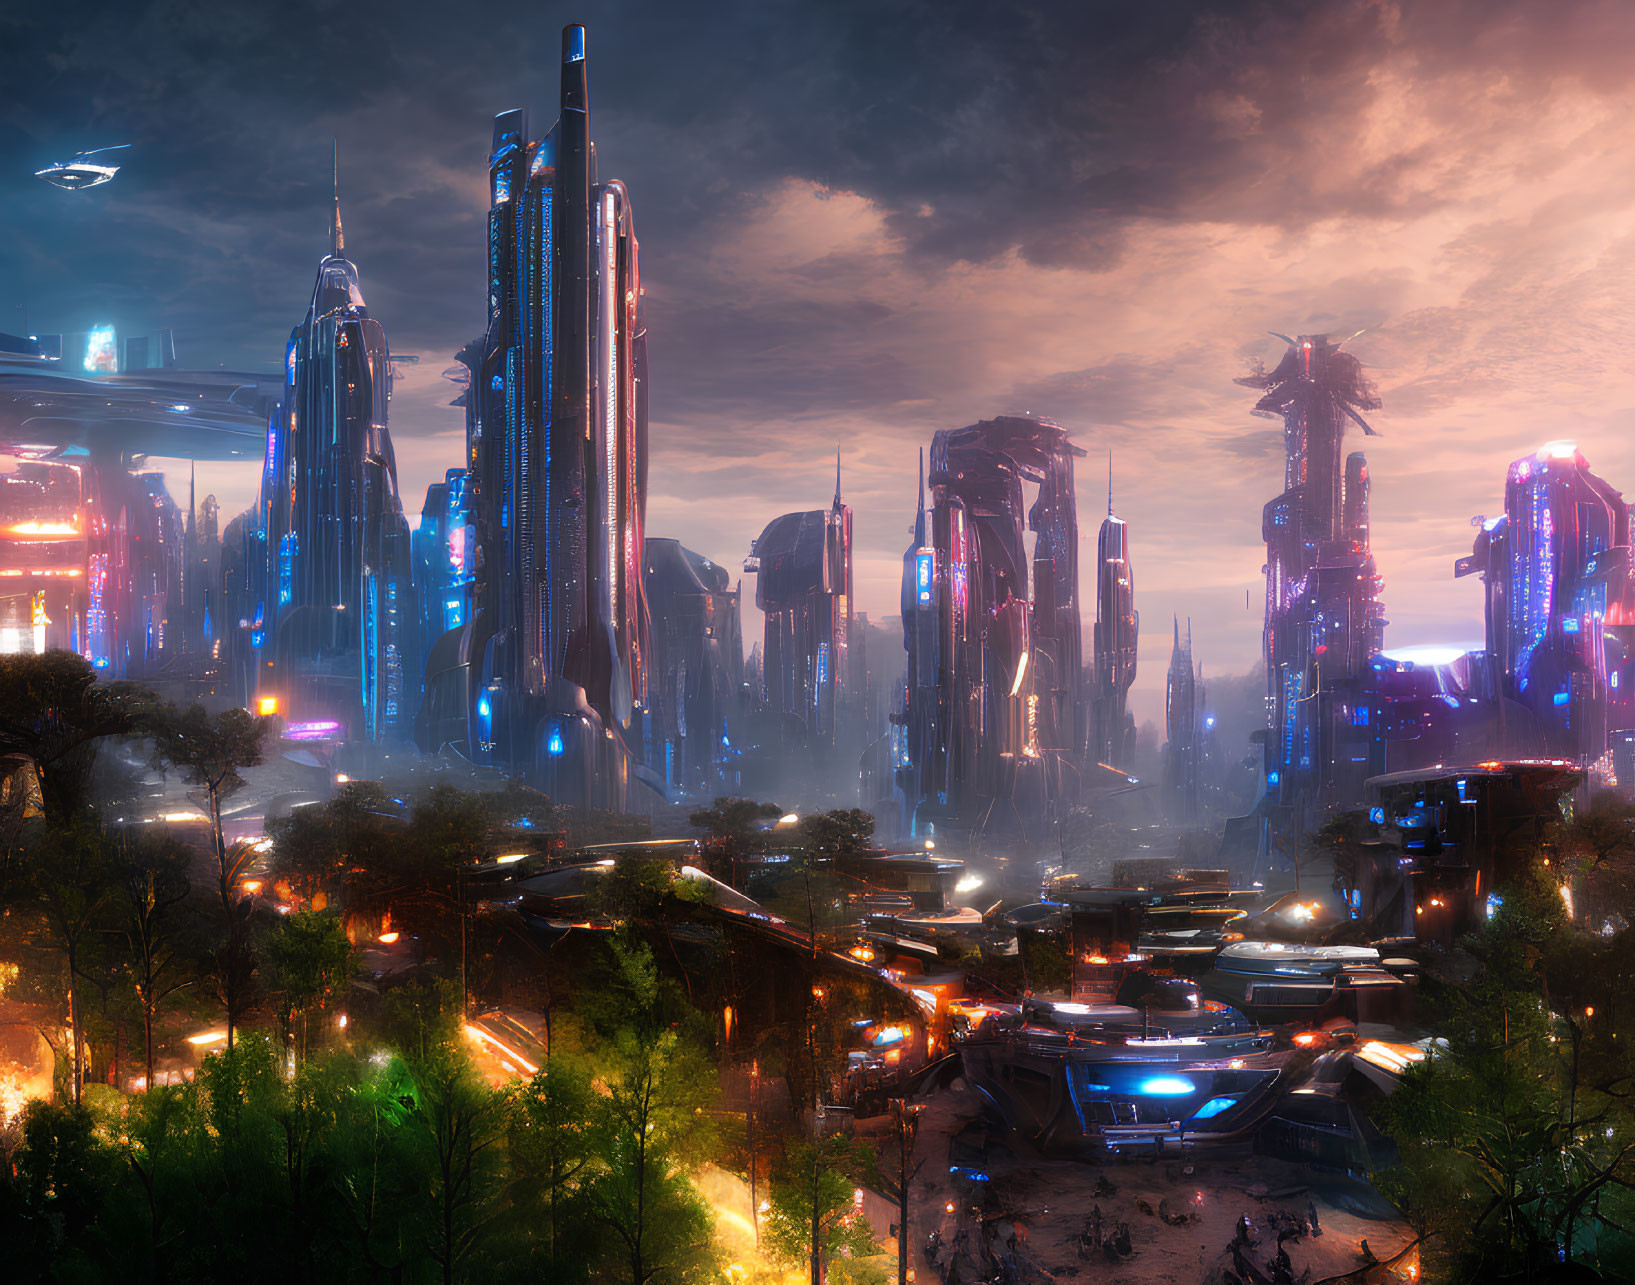 Futuristic cityscape with skyscrapers, neon lights, and lush vegetation at dusk